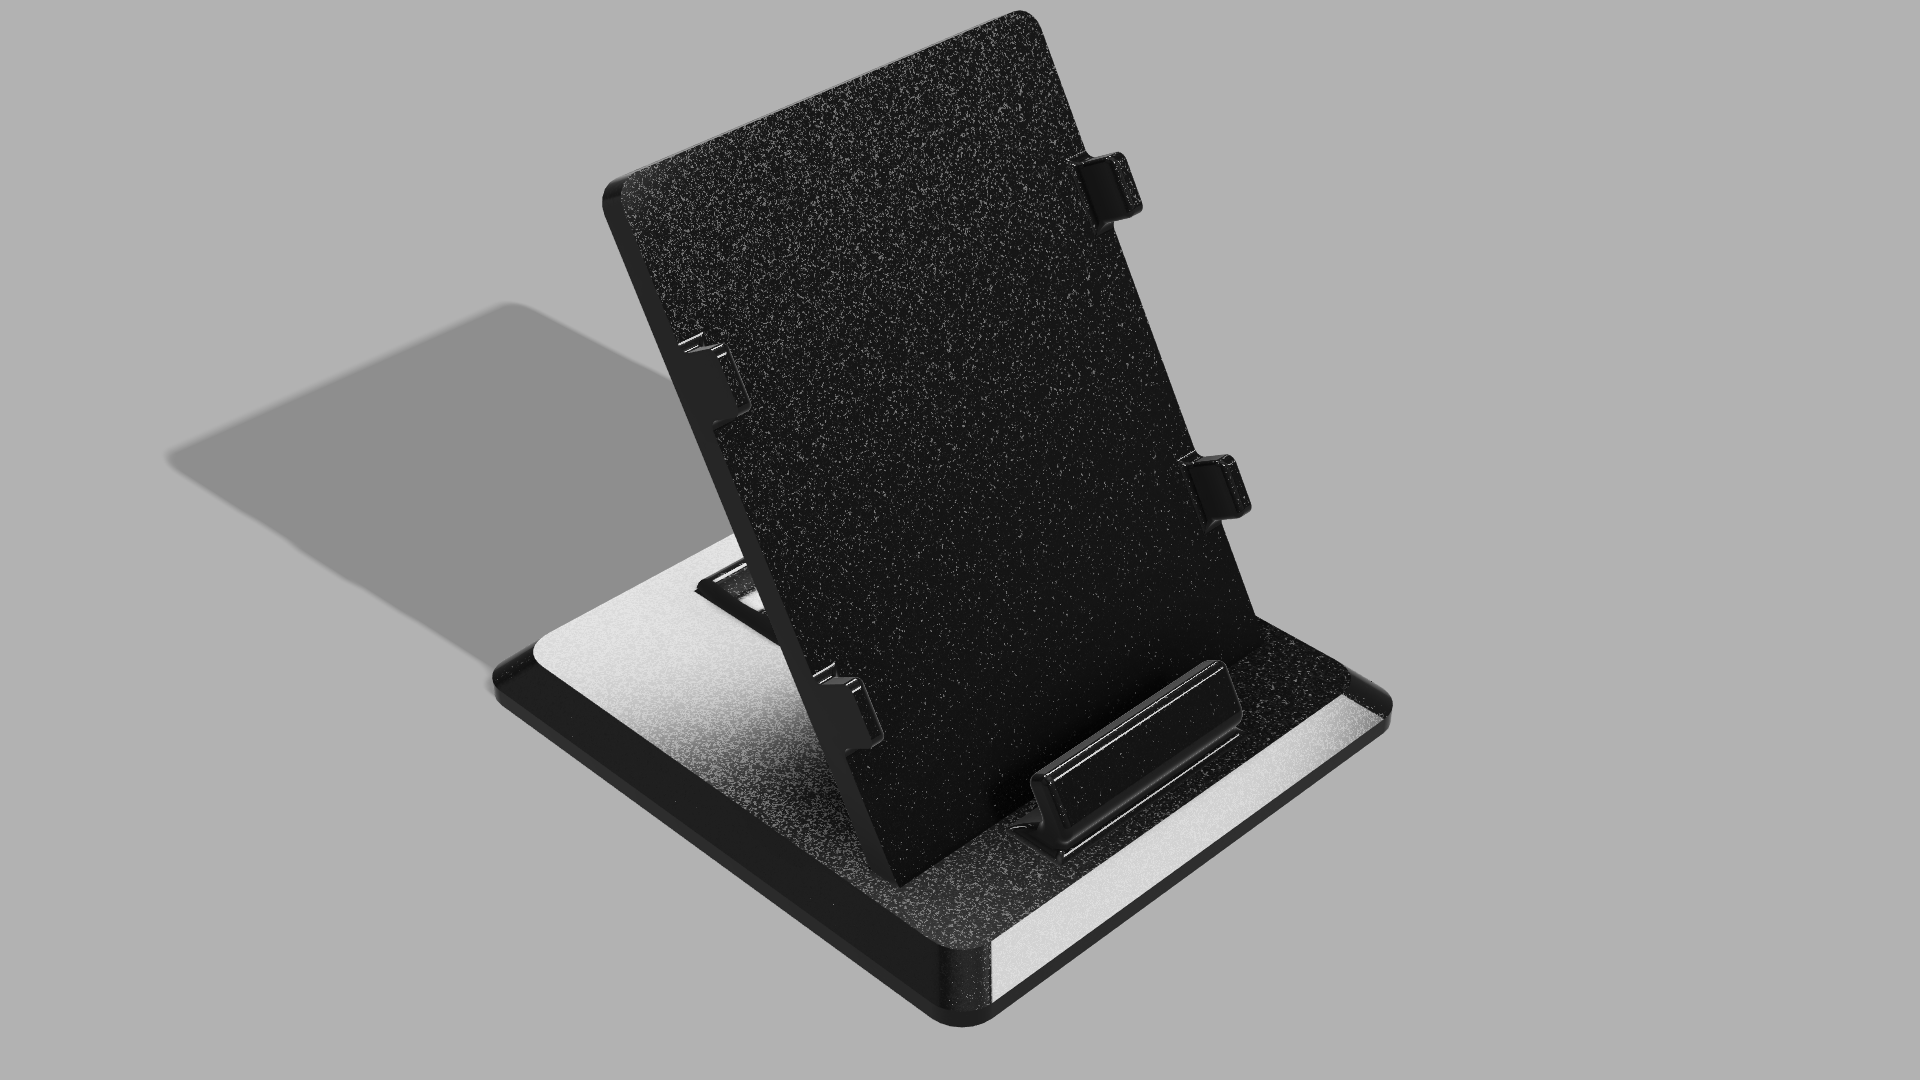 3-part Smartphone Stand without support